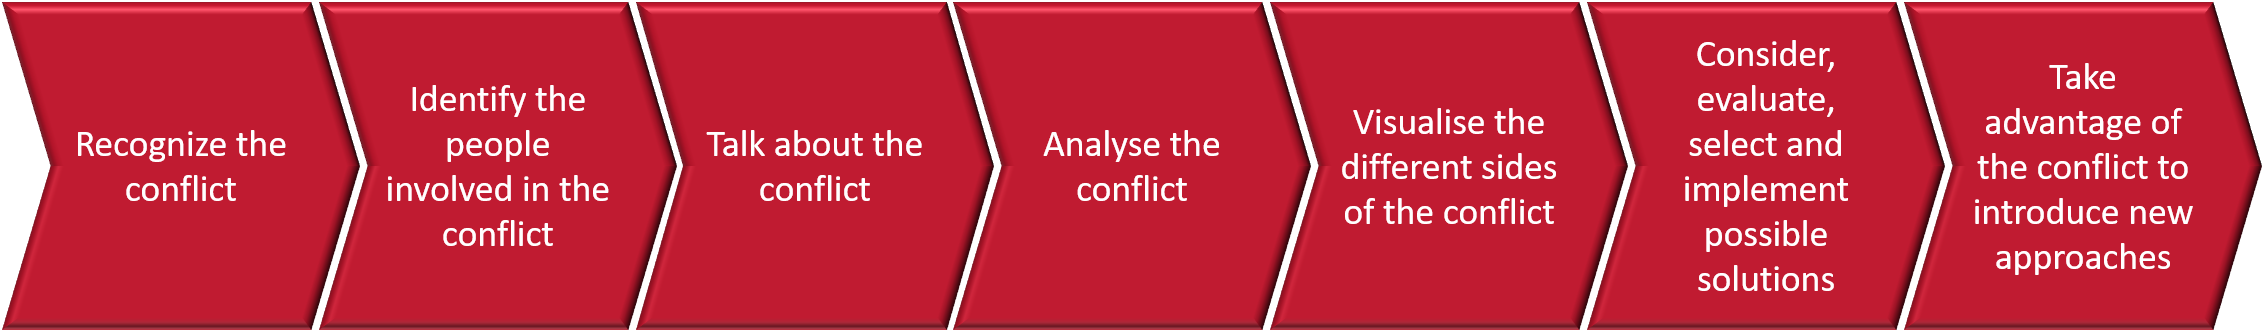 Steps towards conflict resolution graphically shown.